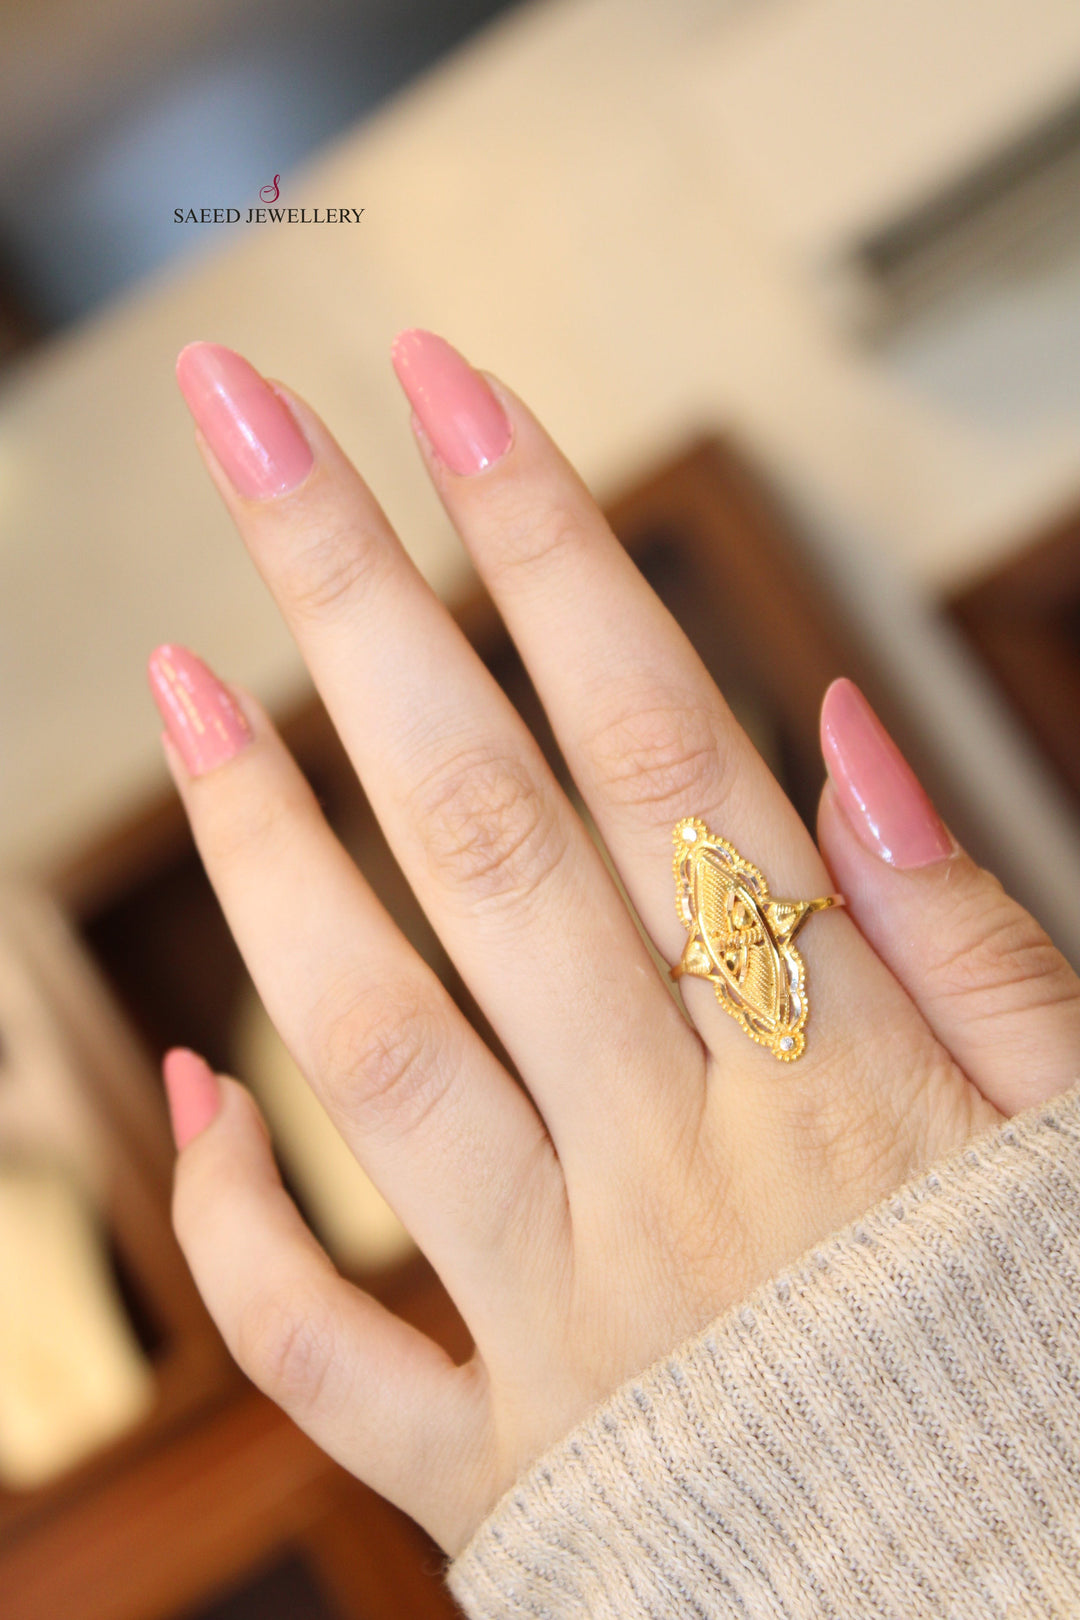 21K Gold Indian Ring by Saeed Jewelry - Image 1